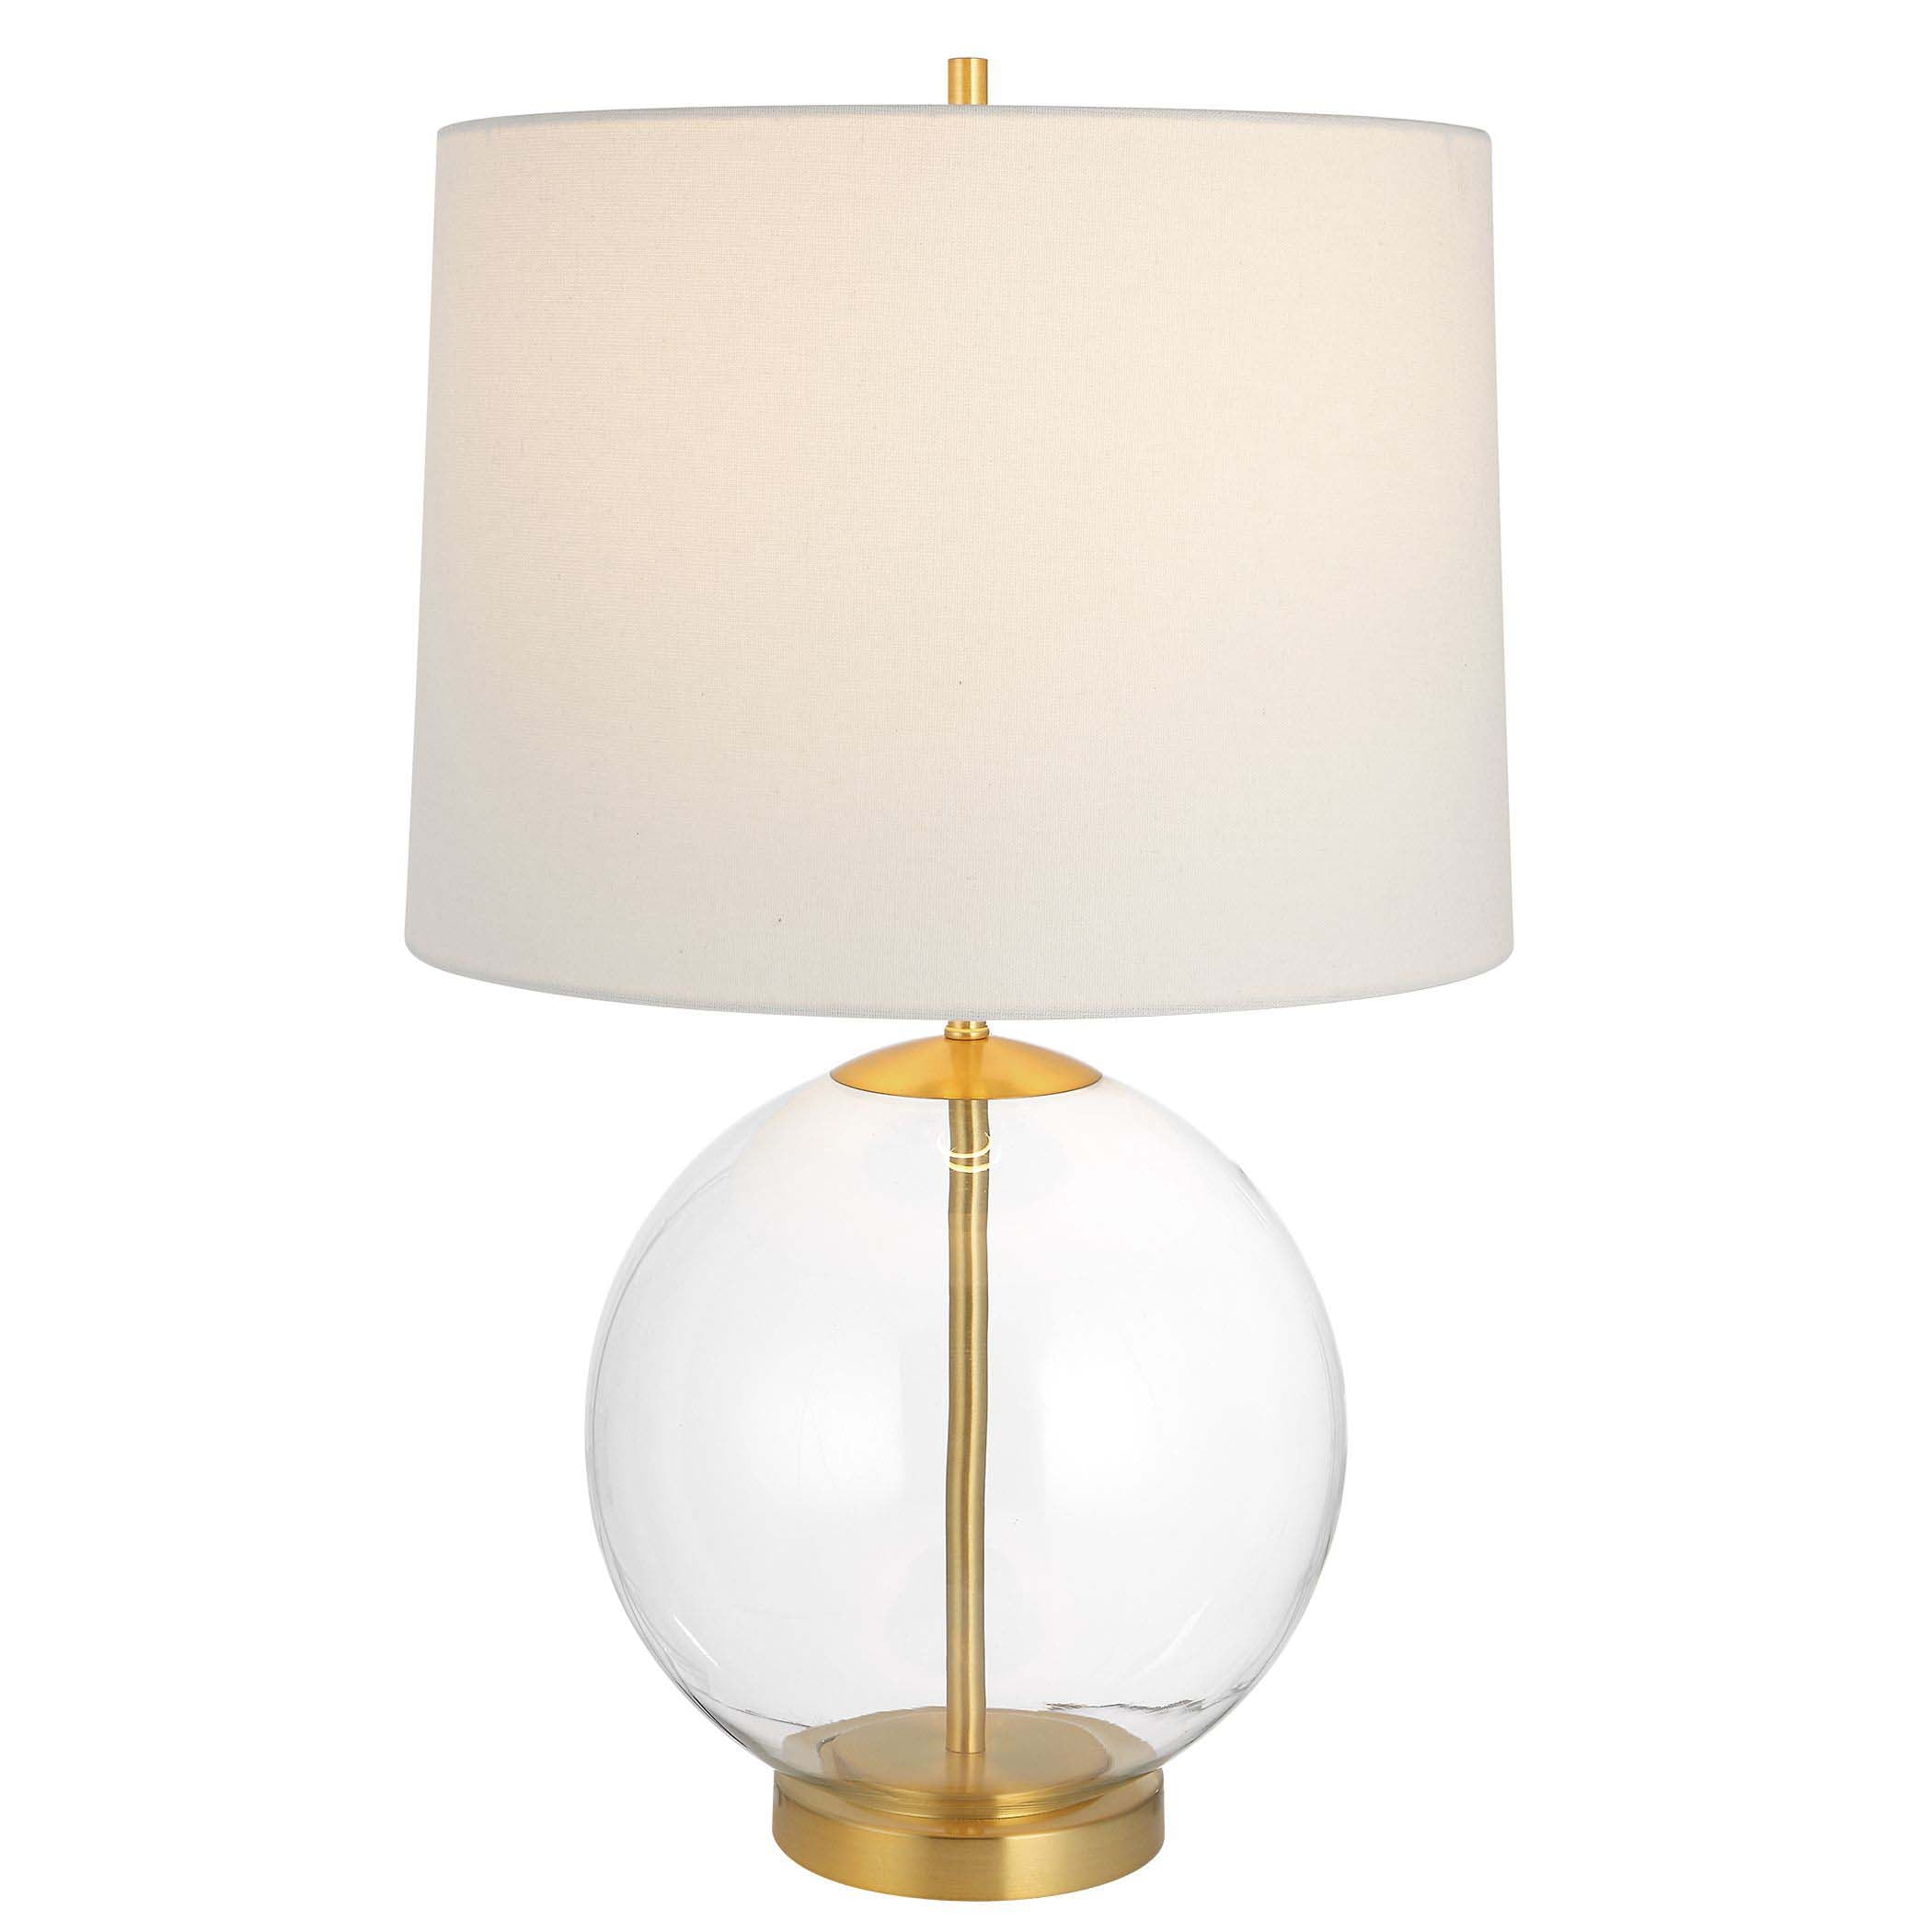 Decor Market Table Lamp Clear Glass Body With Gold Accents